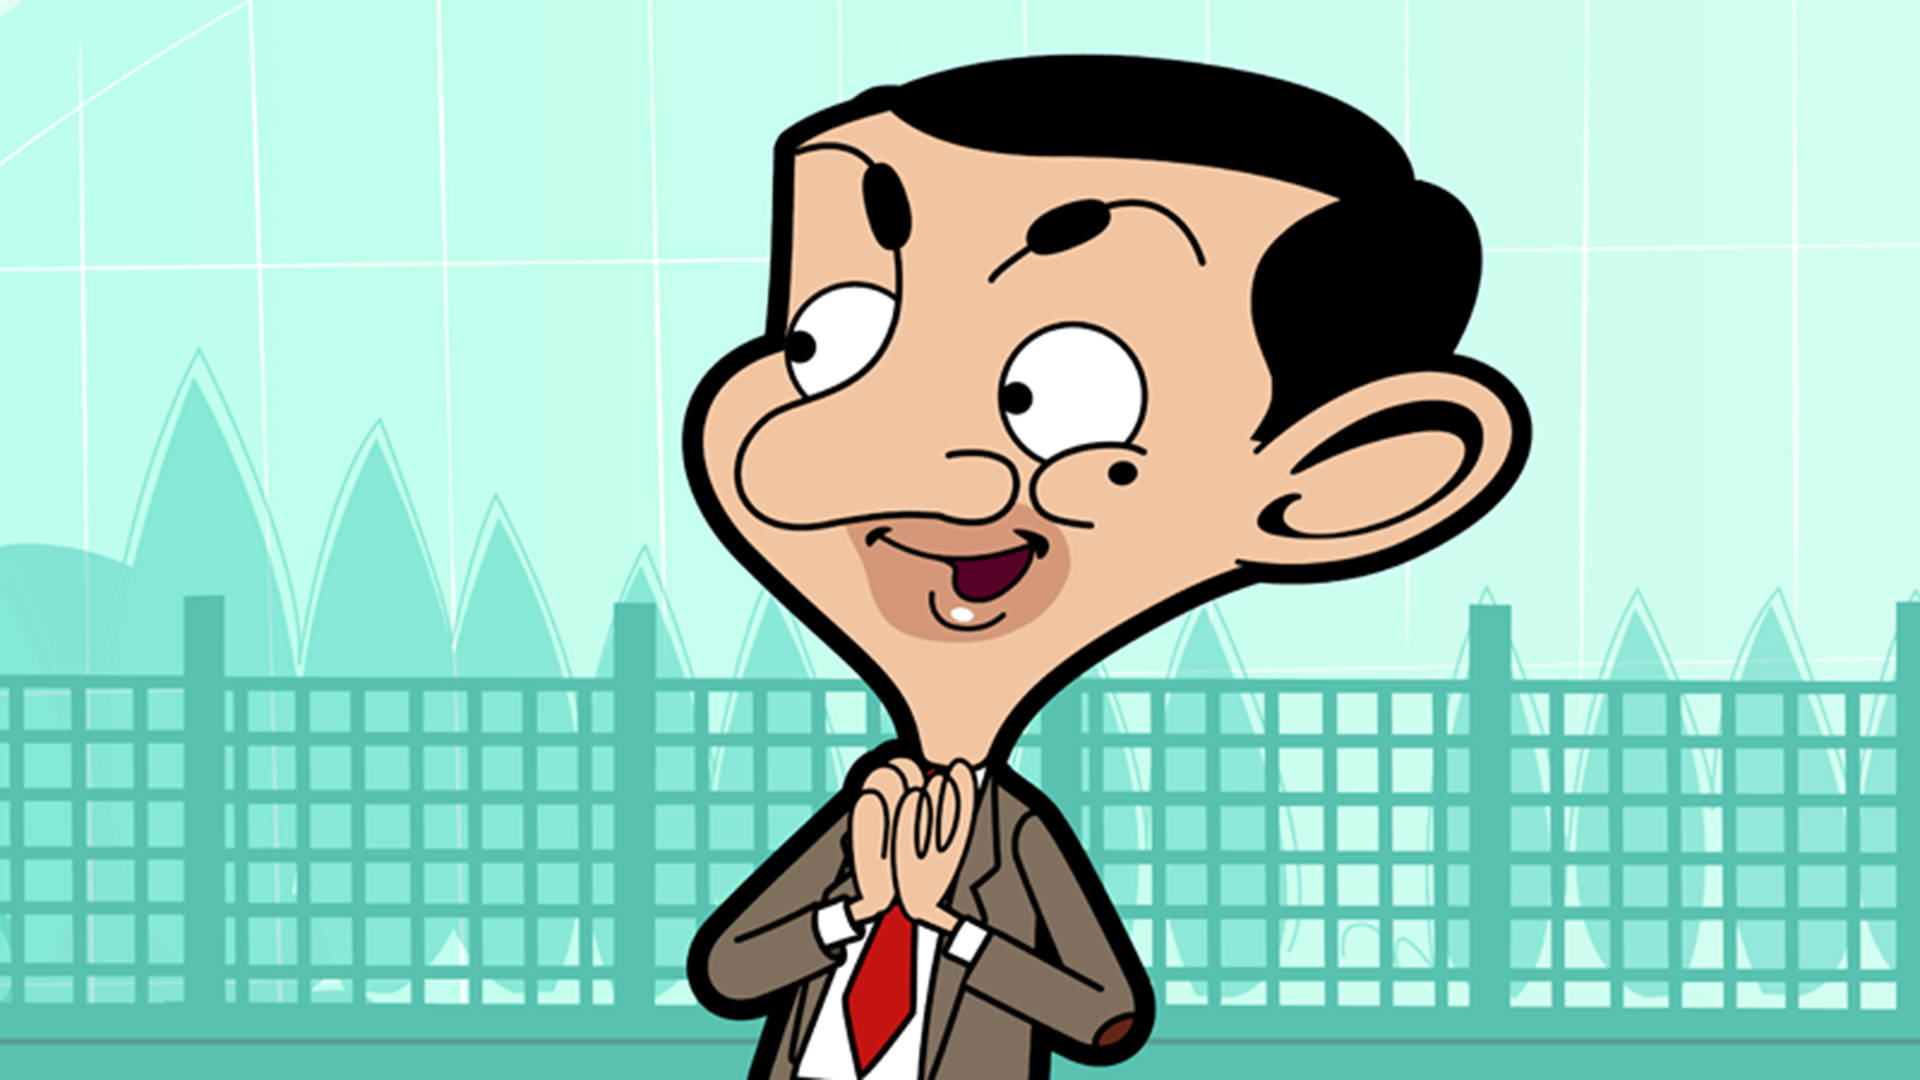 Mr. Bean The Animated Series 2002 Background